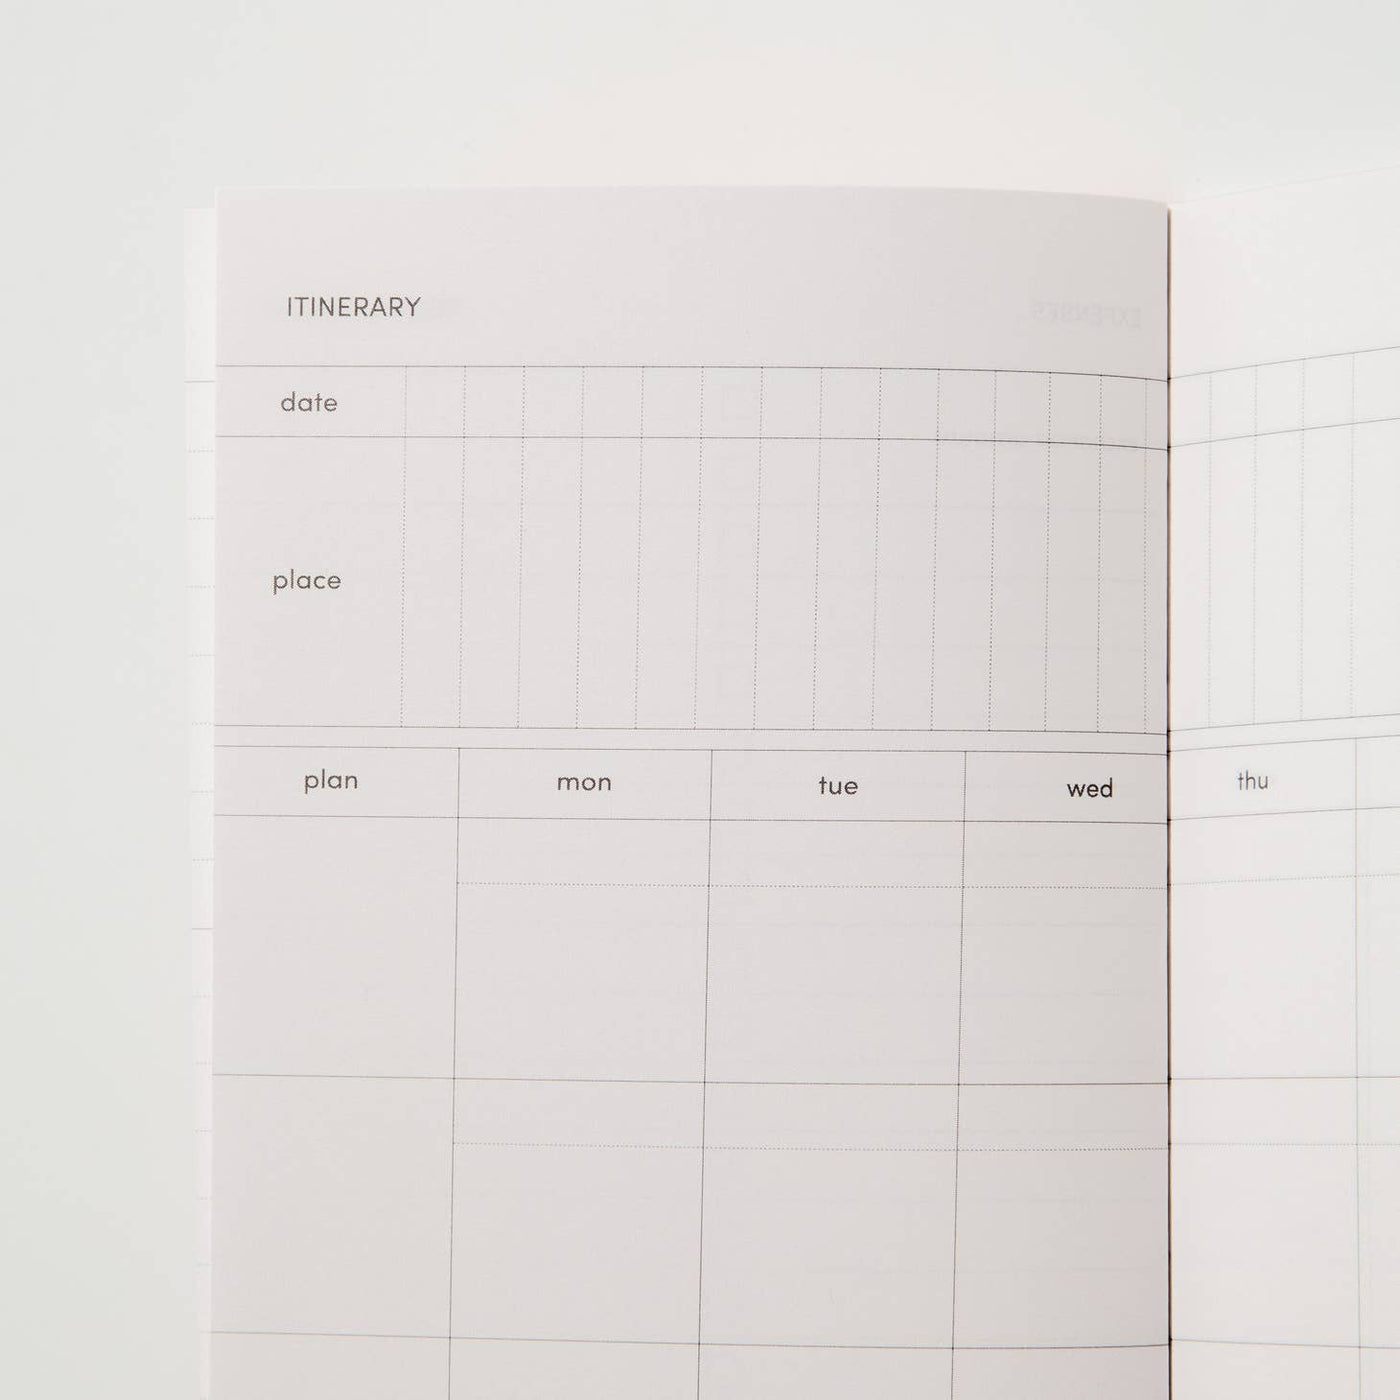 Sample interior page of travel journal showing itinerary with prompts for dates, places, and plans and a calendar grid view